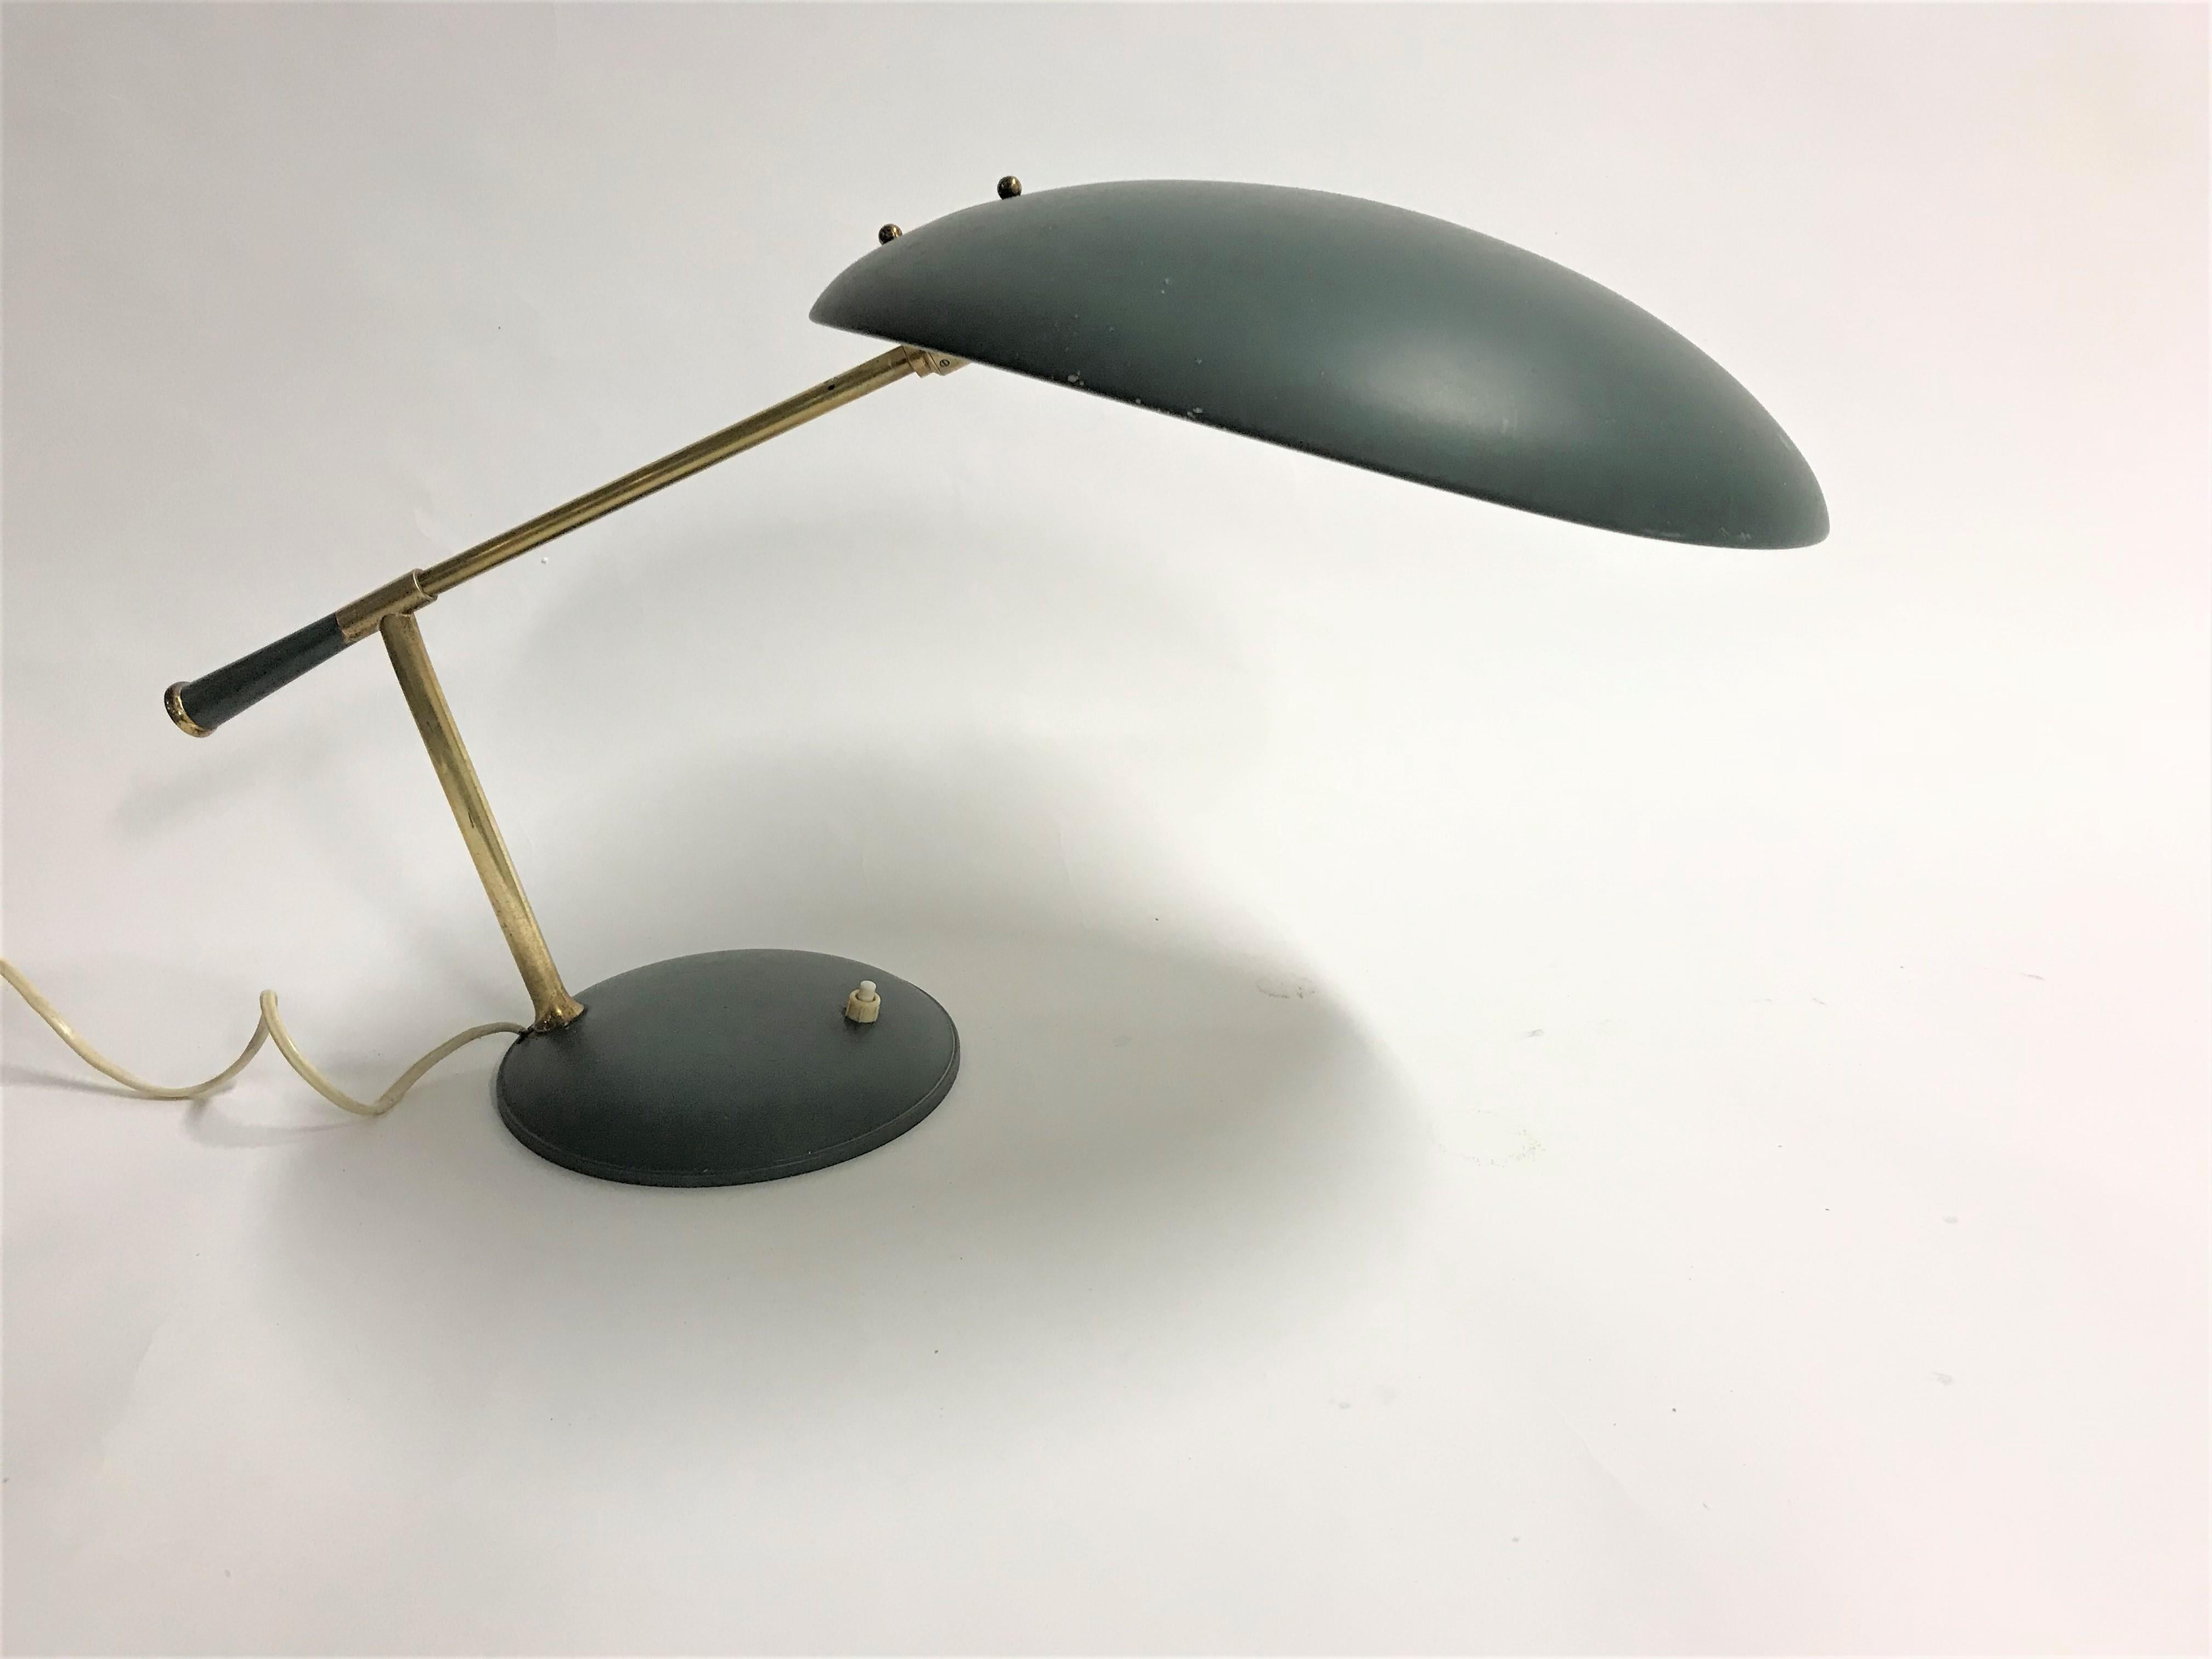 This midcentury table lamp has a beautiful design and is rather unique.

Louis Kalff made some famous designs like the Timor desk lamp or the 'z' shaped desk lamp.

This one we never encountered.

The angle of the shade is adjustable in order